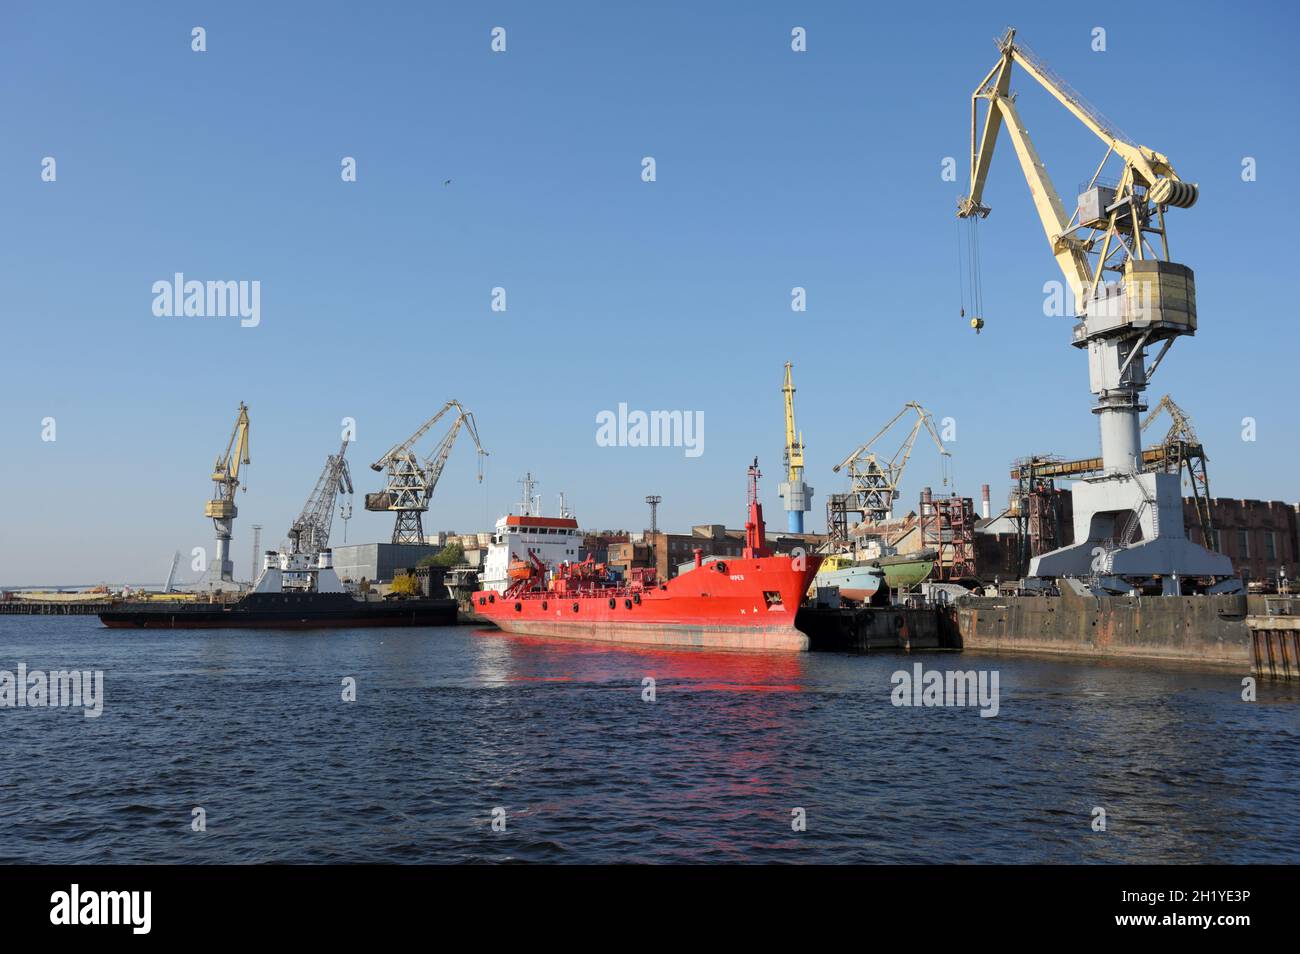 Cargo ship under uploading in the port of St. Petersburg, Russia Stock Photo